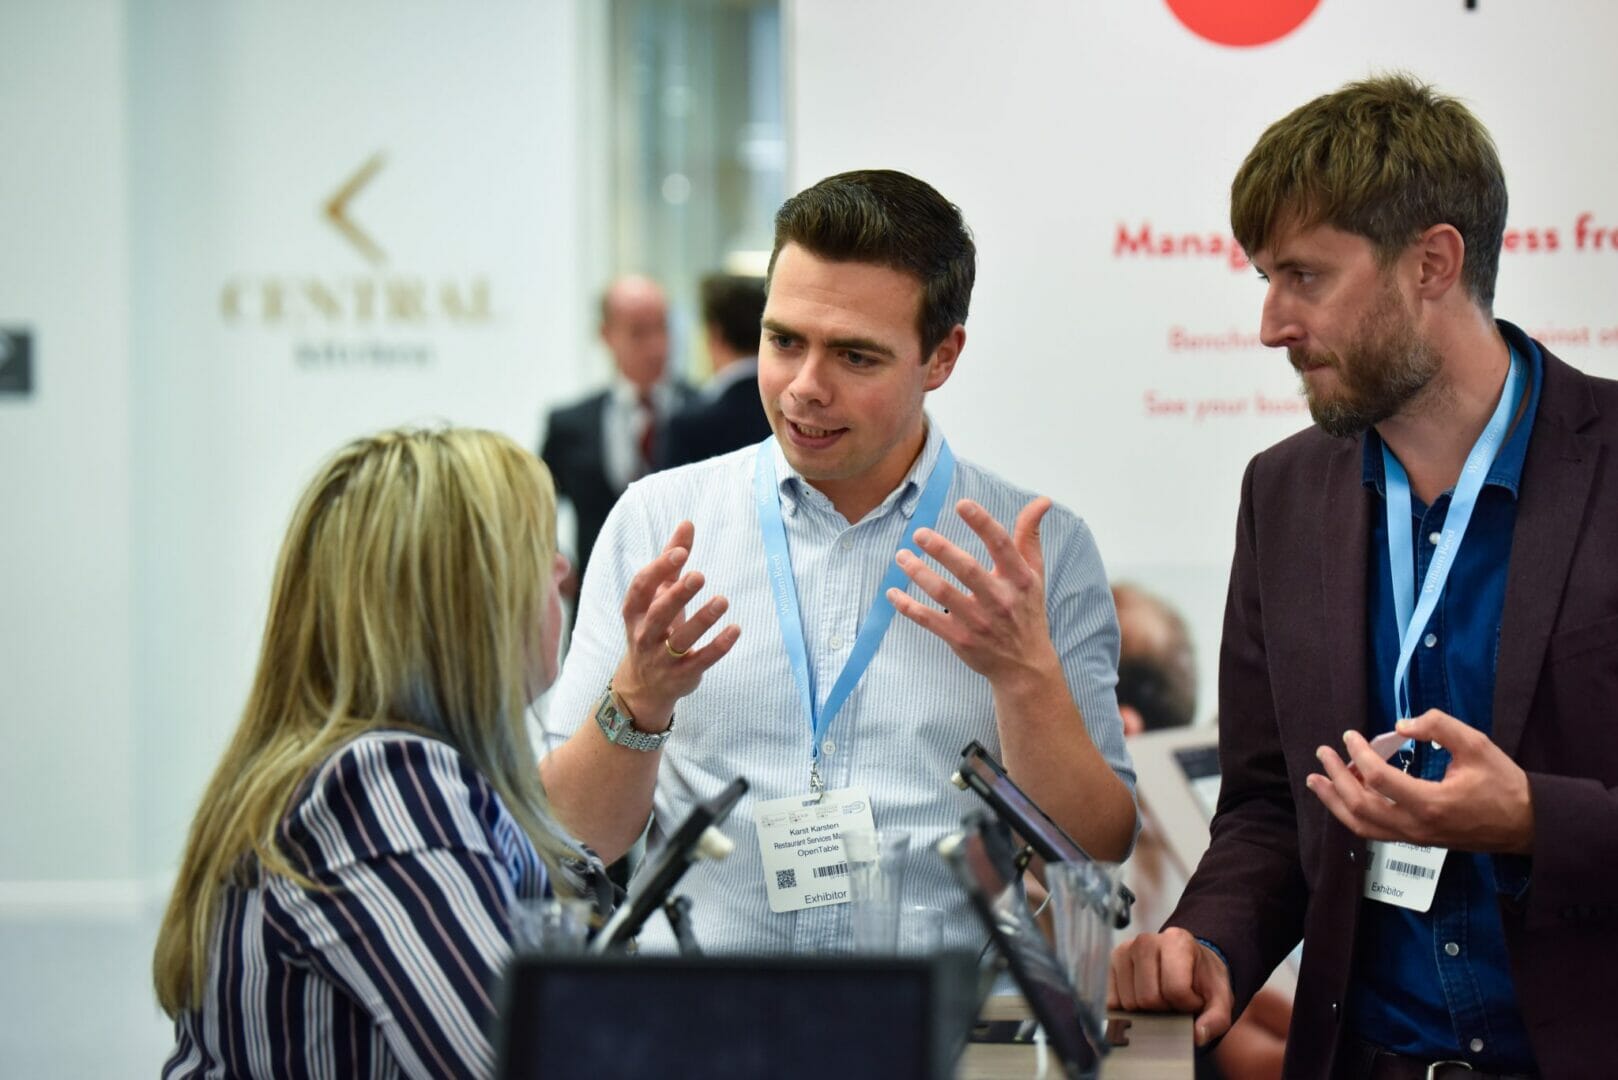 Meet hundreds of industry experts and suppliers at The Restaurant Show next week